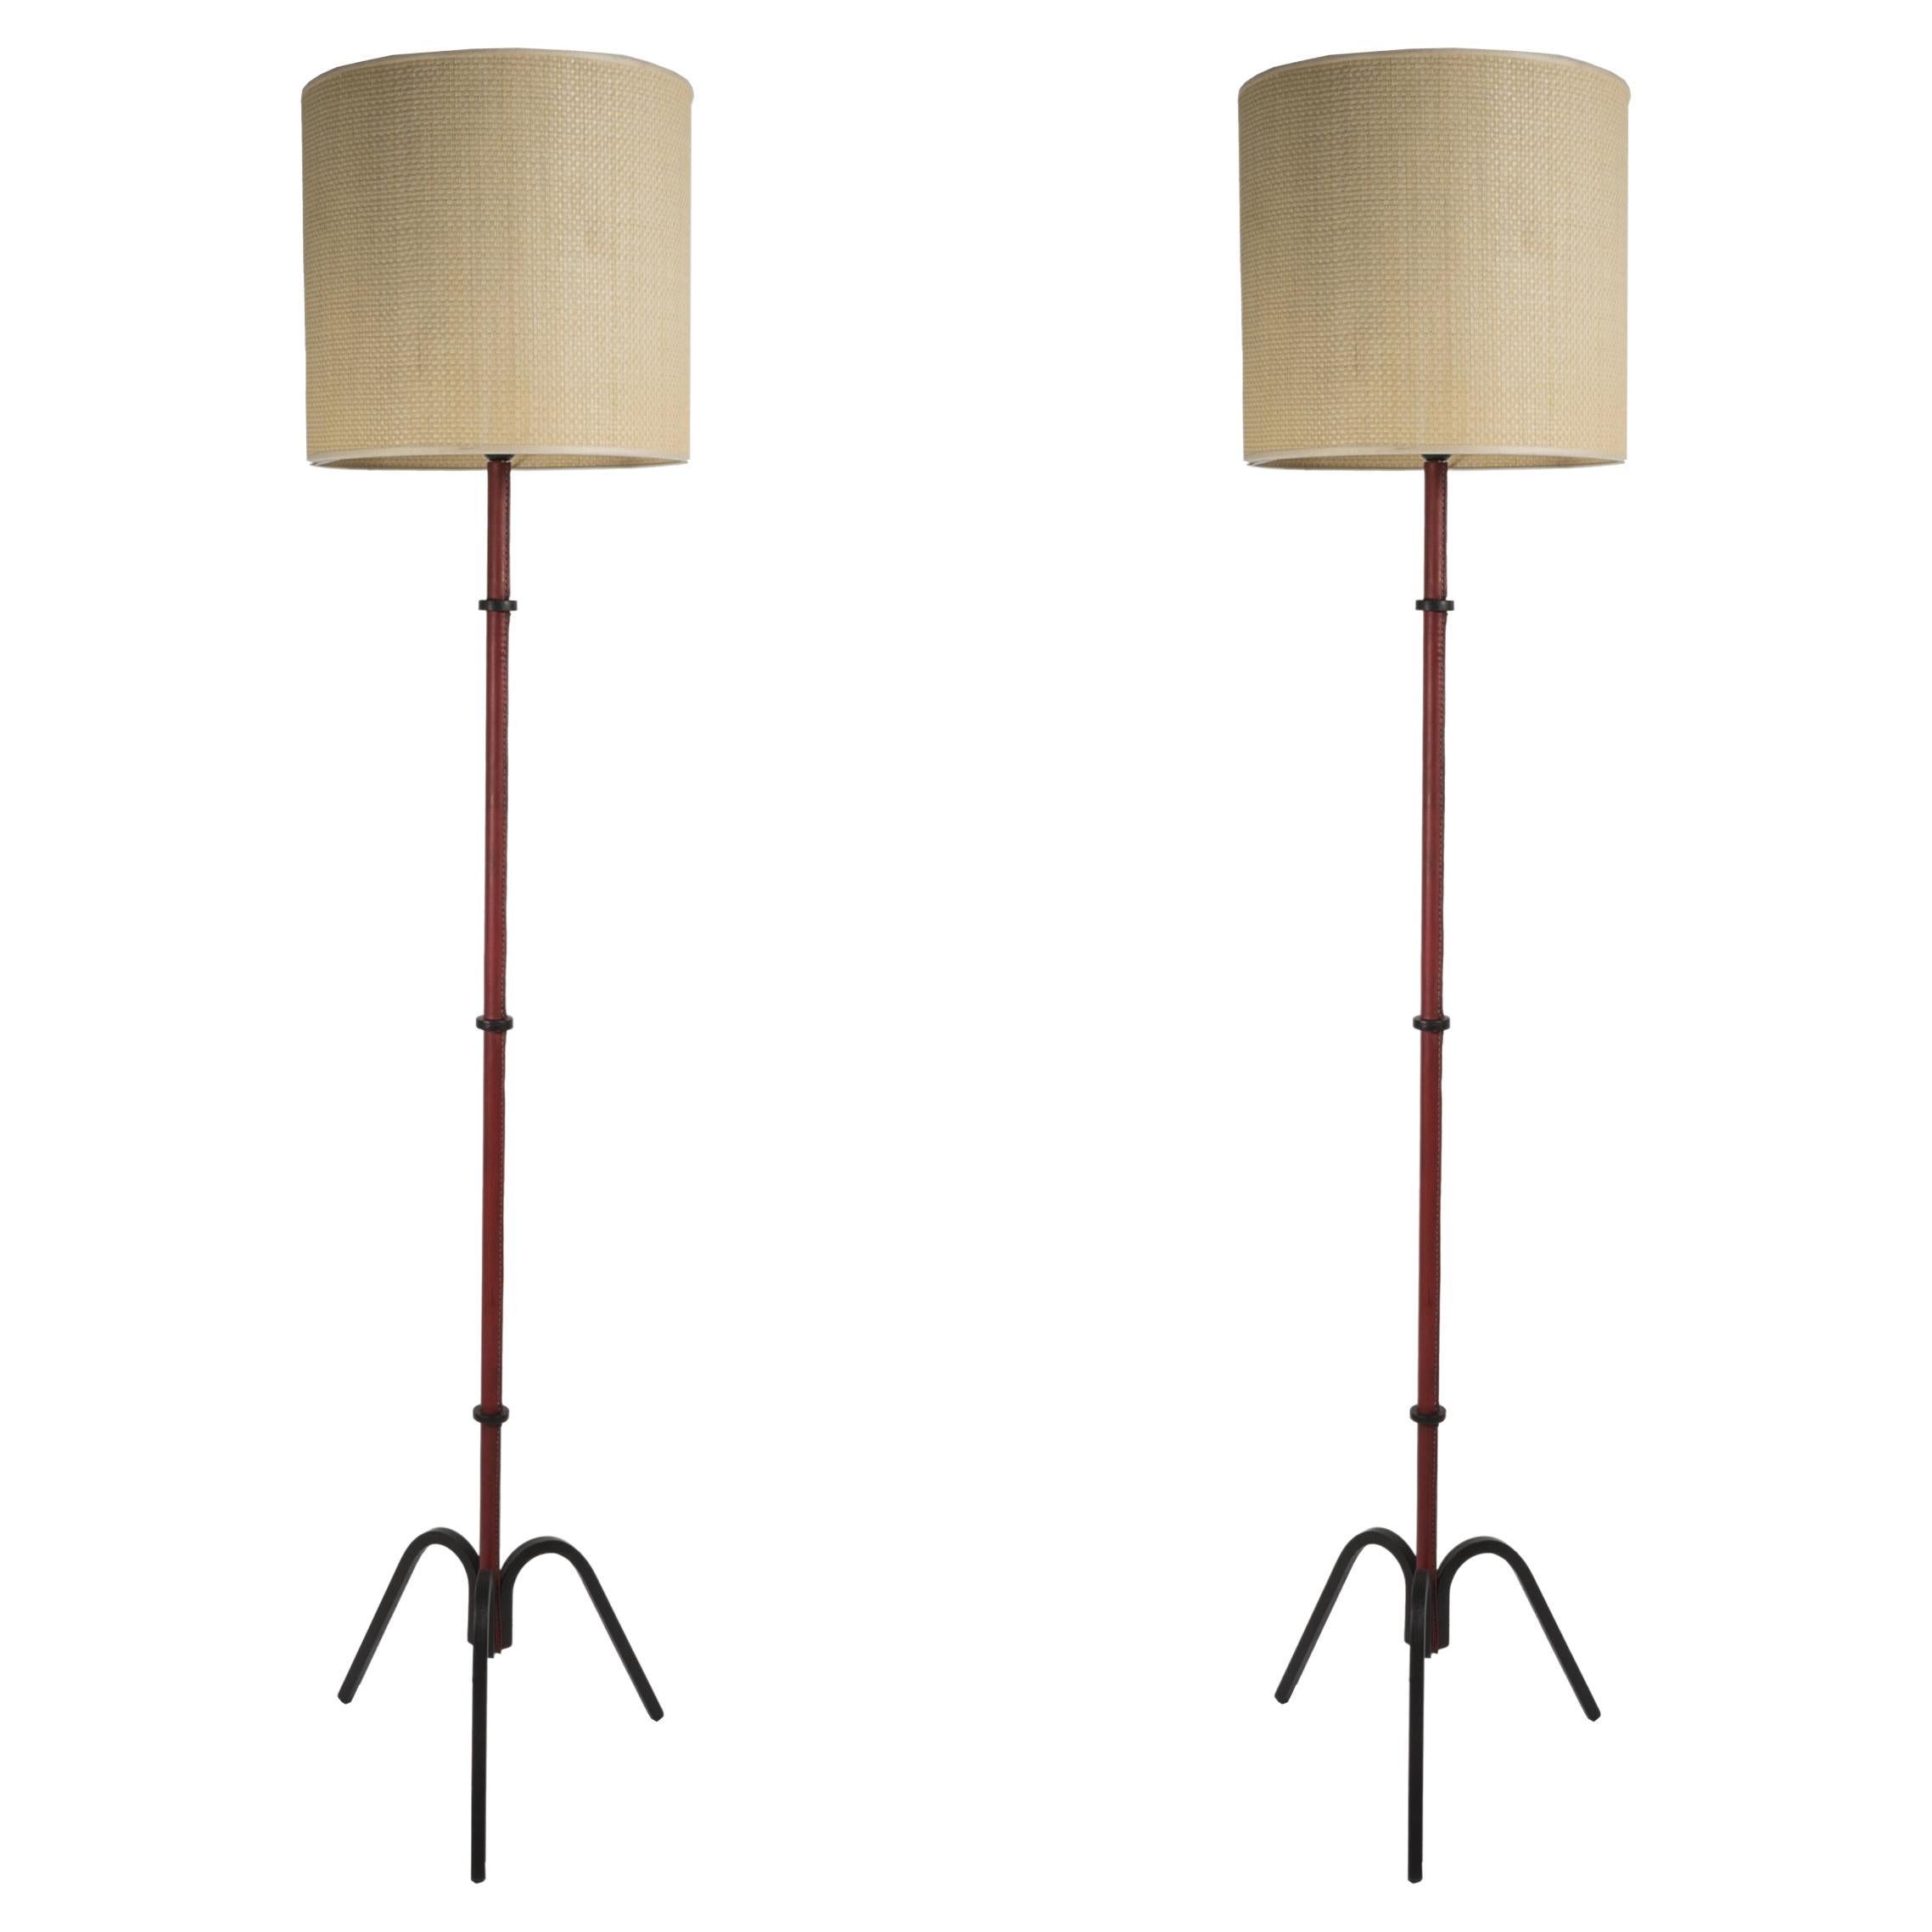 Pair of 1950's Stitched Leather Floor Lamp by Jacques Adnet For Sale